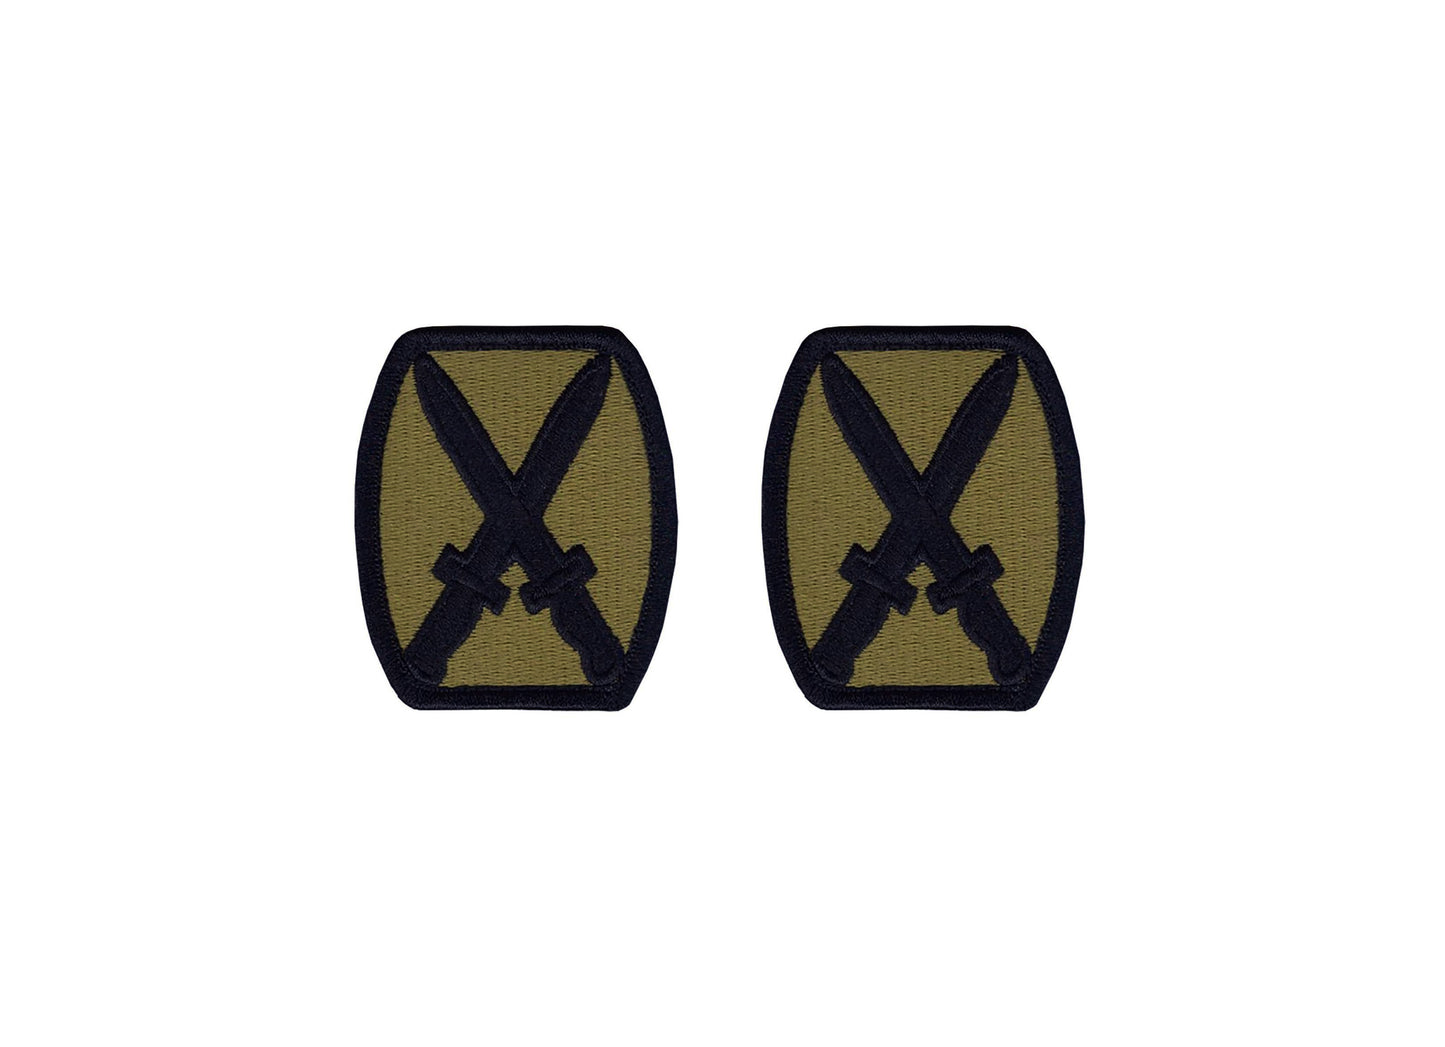 U.S. Army 10th Mountain Division OCP Patch with Hook Fastener (pair)